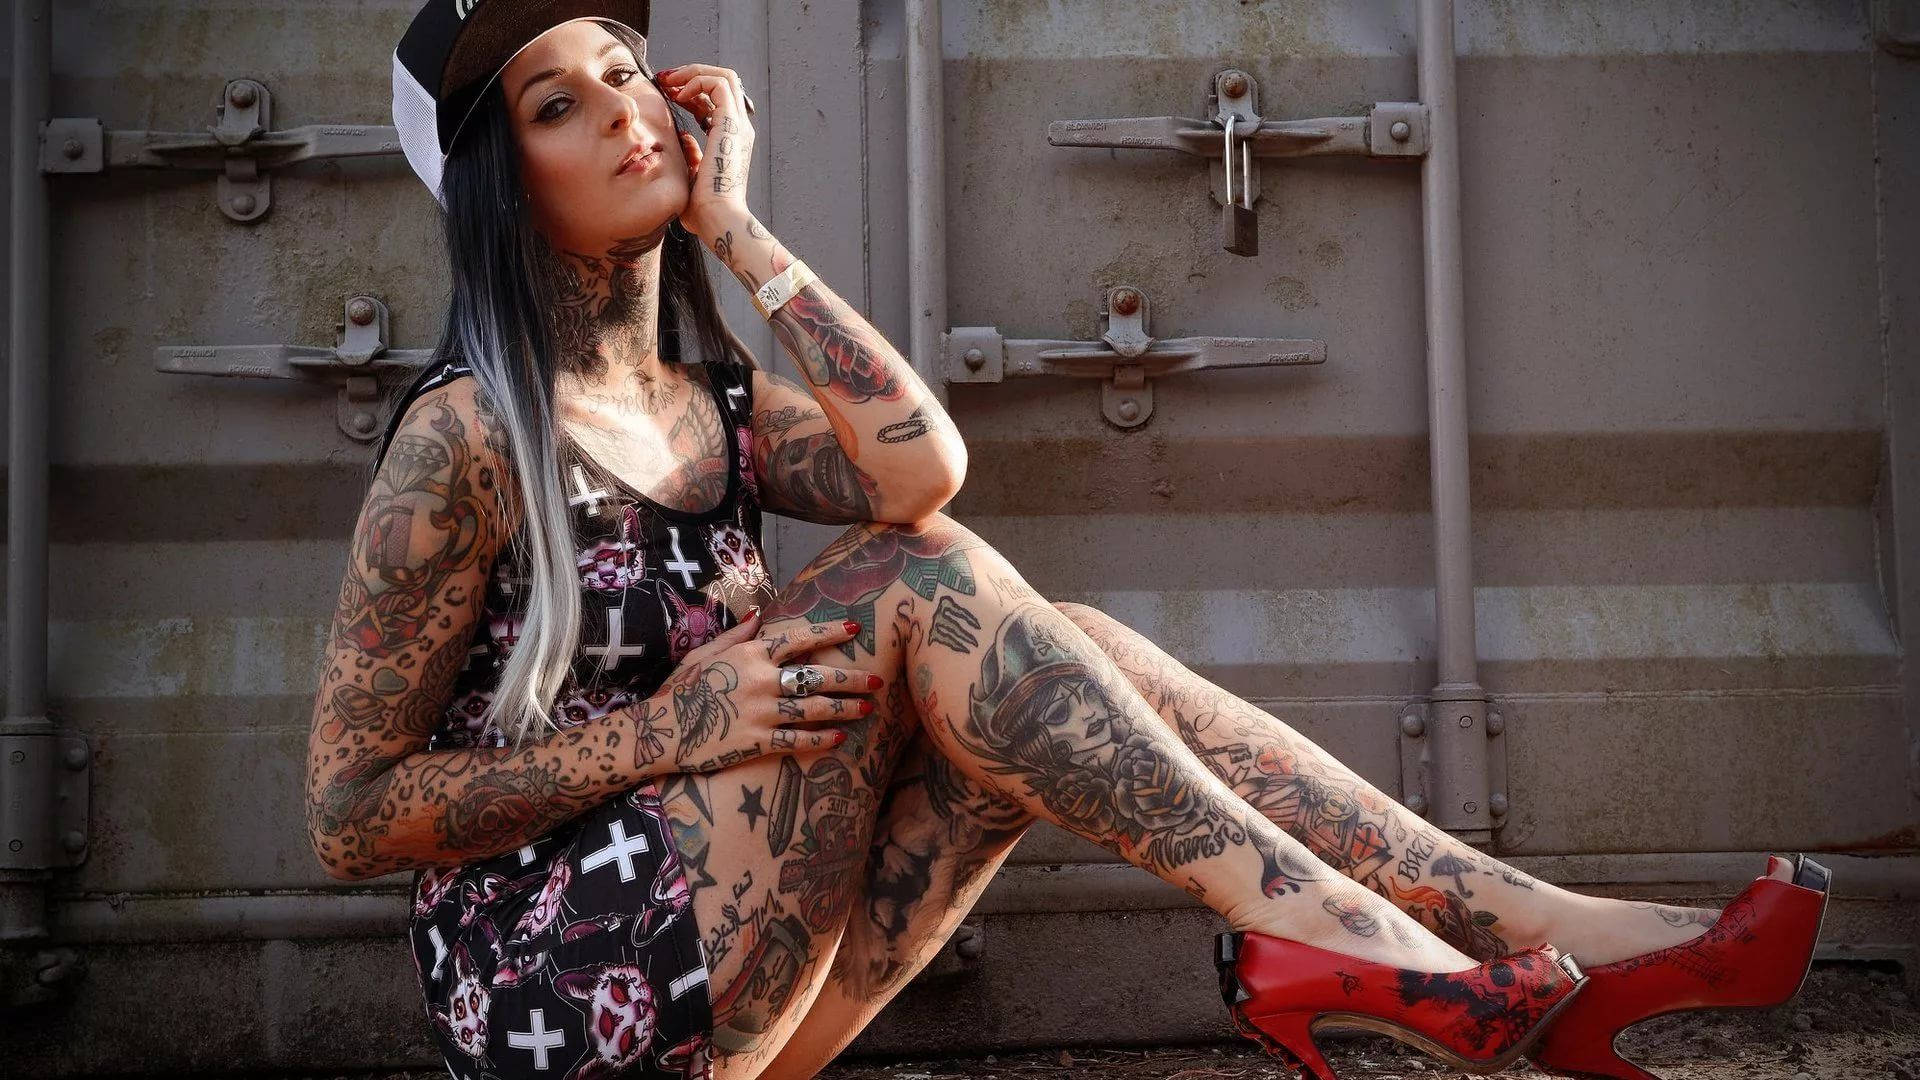 Sexy Woman With Tattoos Background